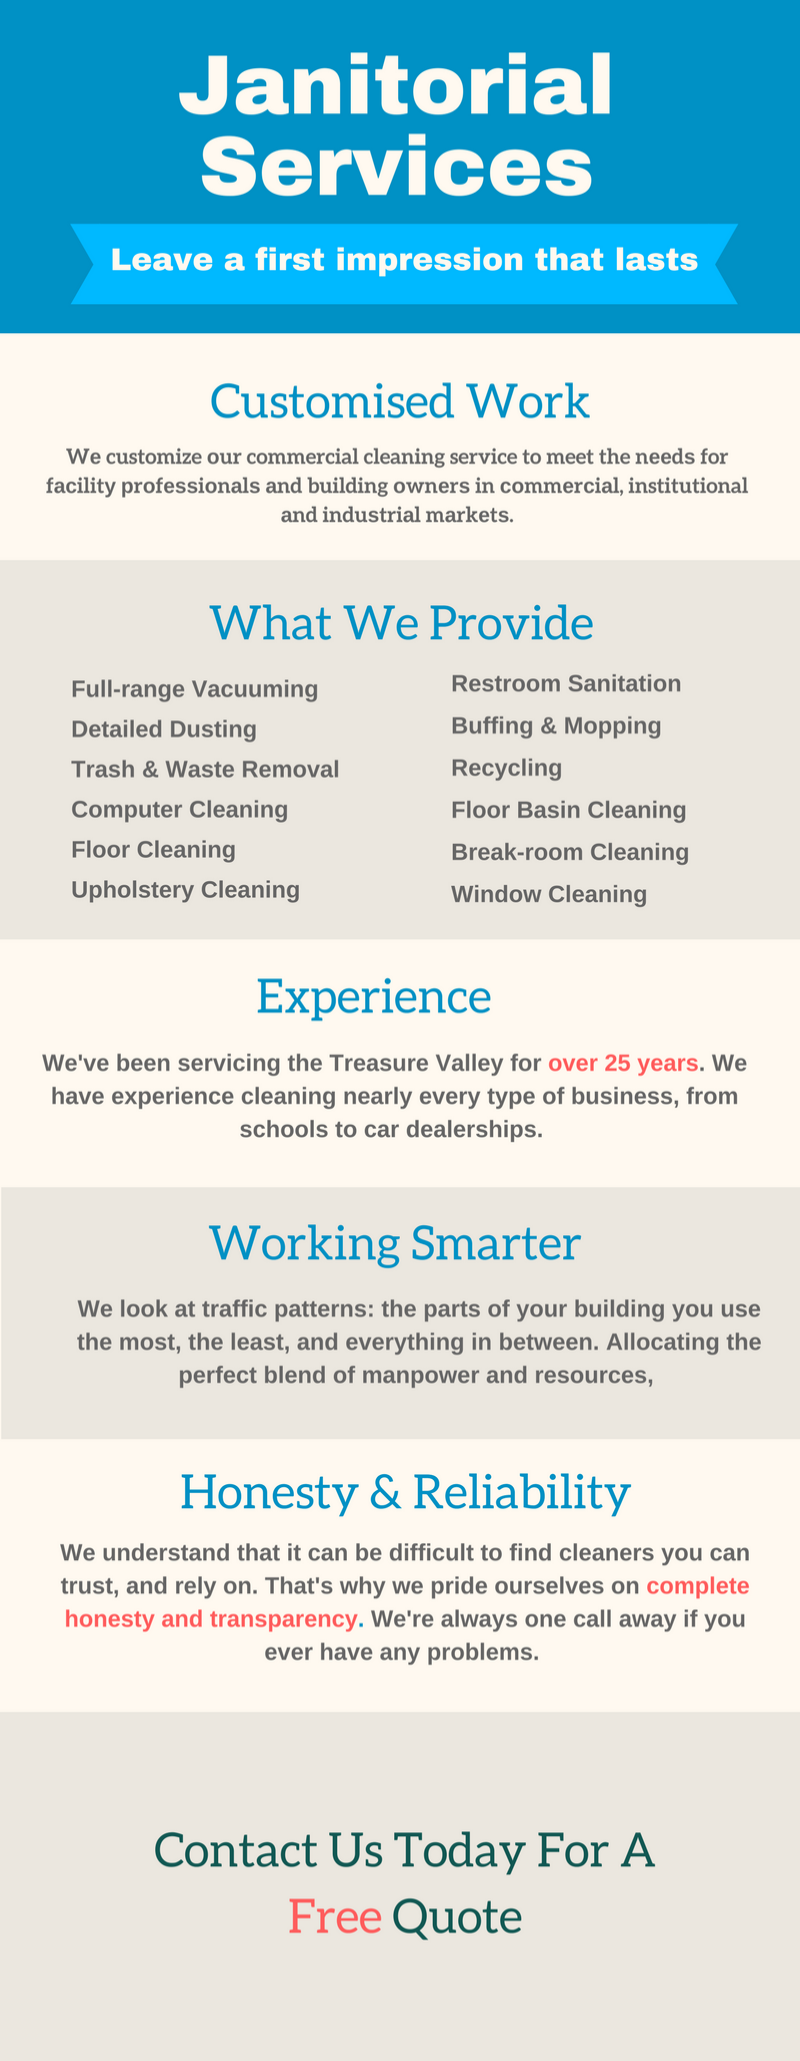 Janitorial Services - commercial cleaning